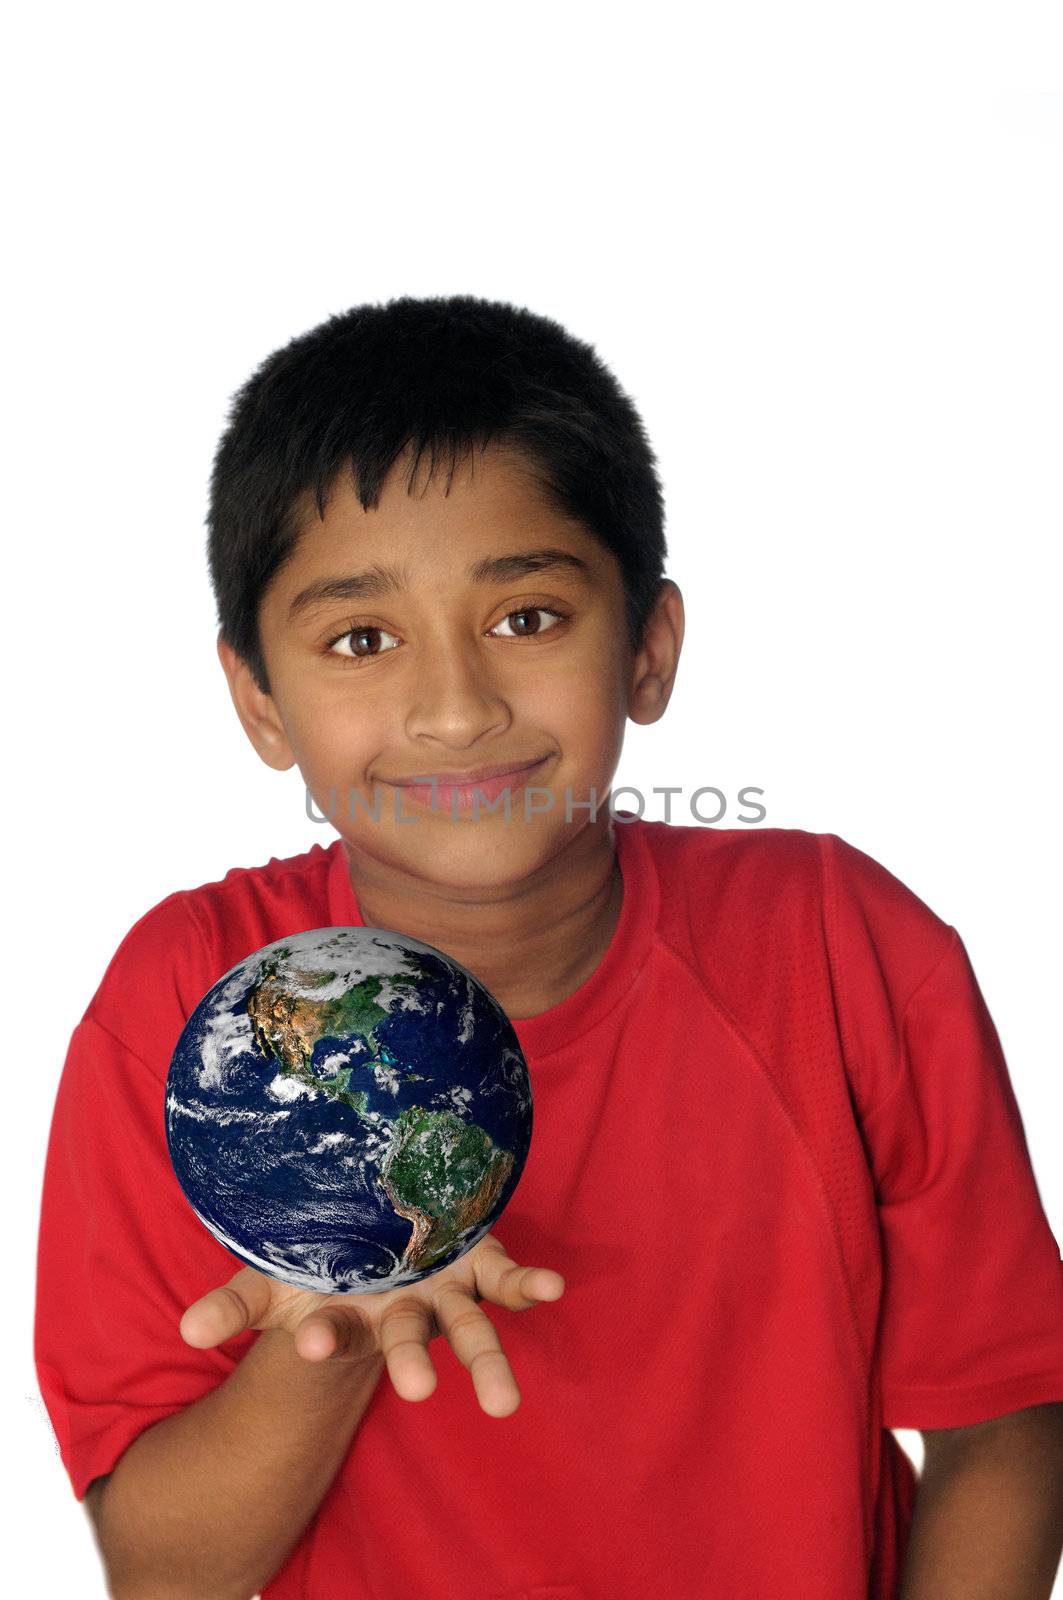 An handsome Indian showing world is in your hands